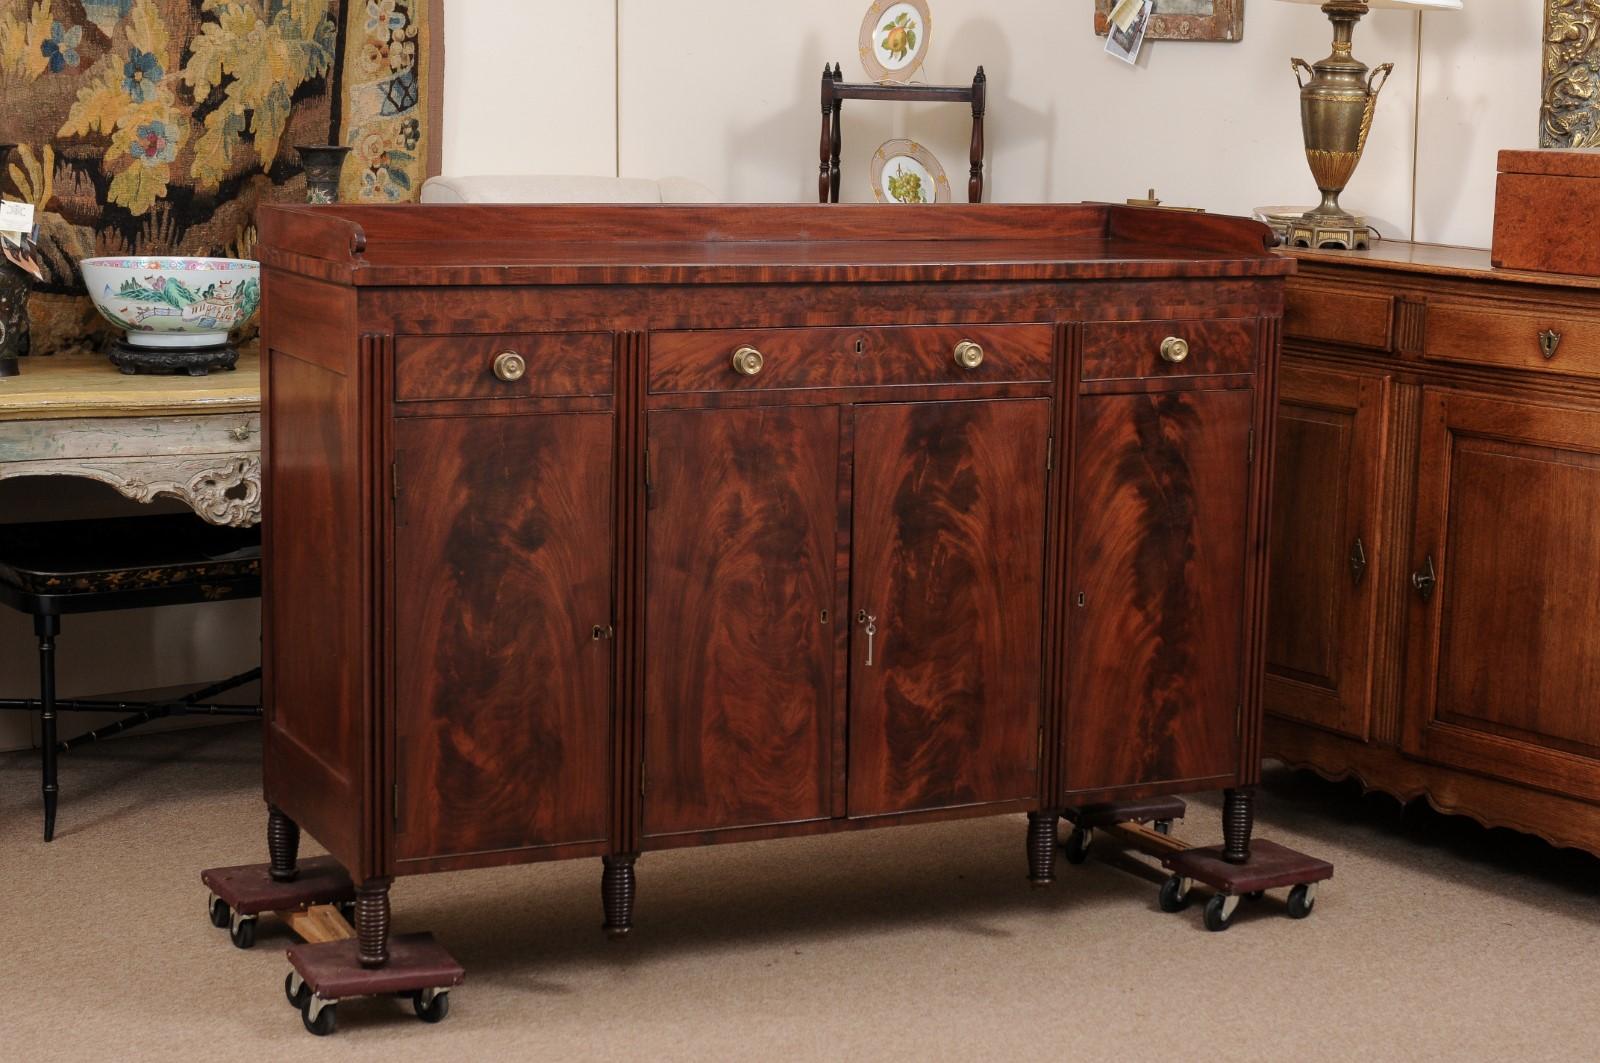 19th Century American Sheraton Sideboard in Mahogany with 4 Cabinet Doors 11